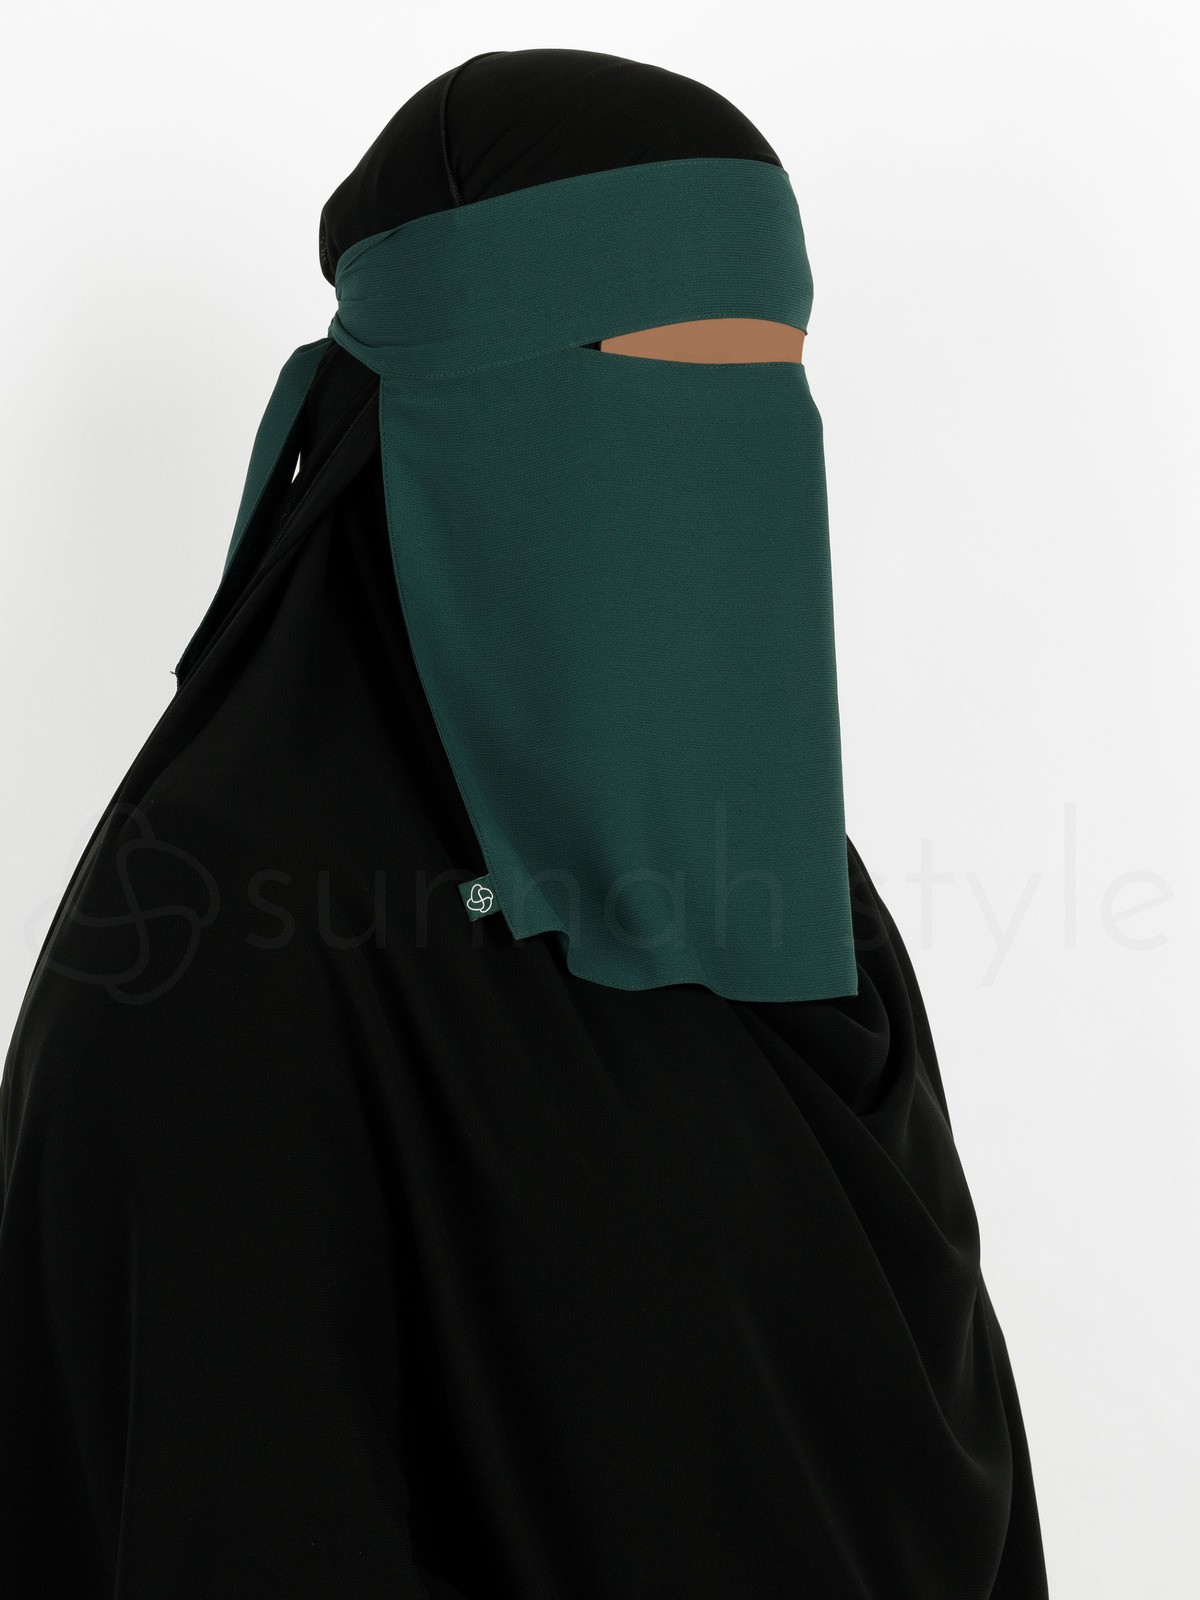 Sunnah Style - Short One Layer Niqab (Pine)